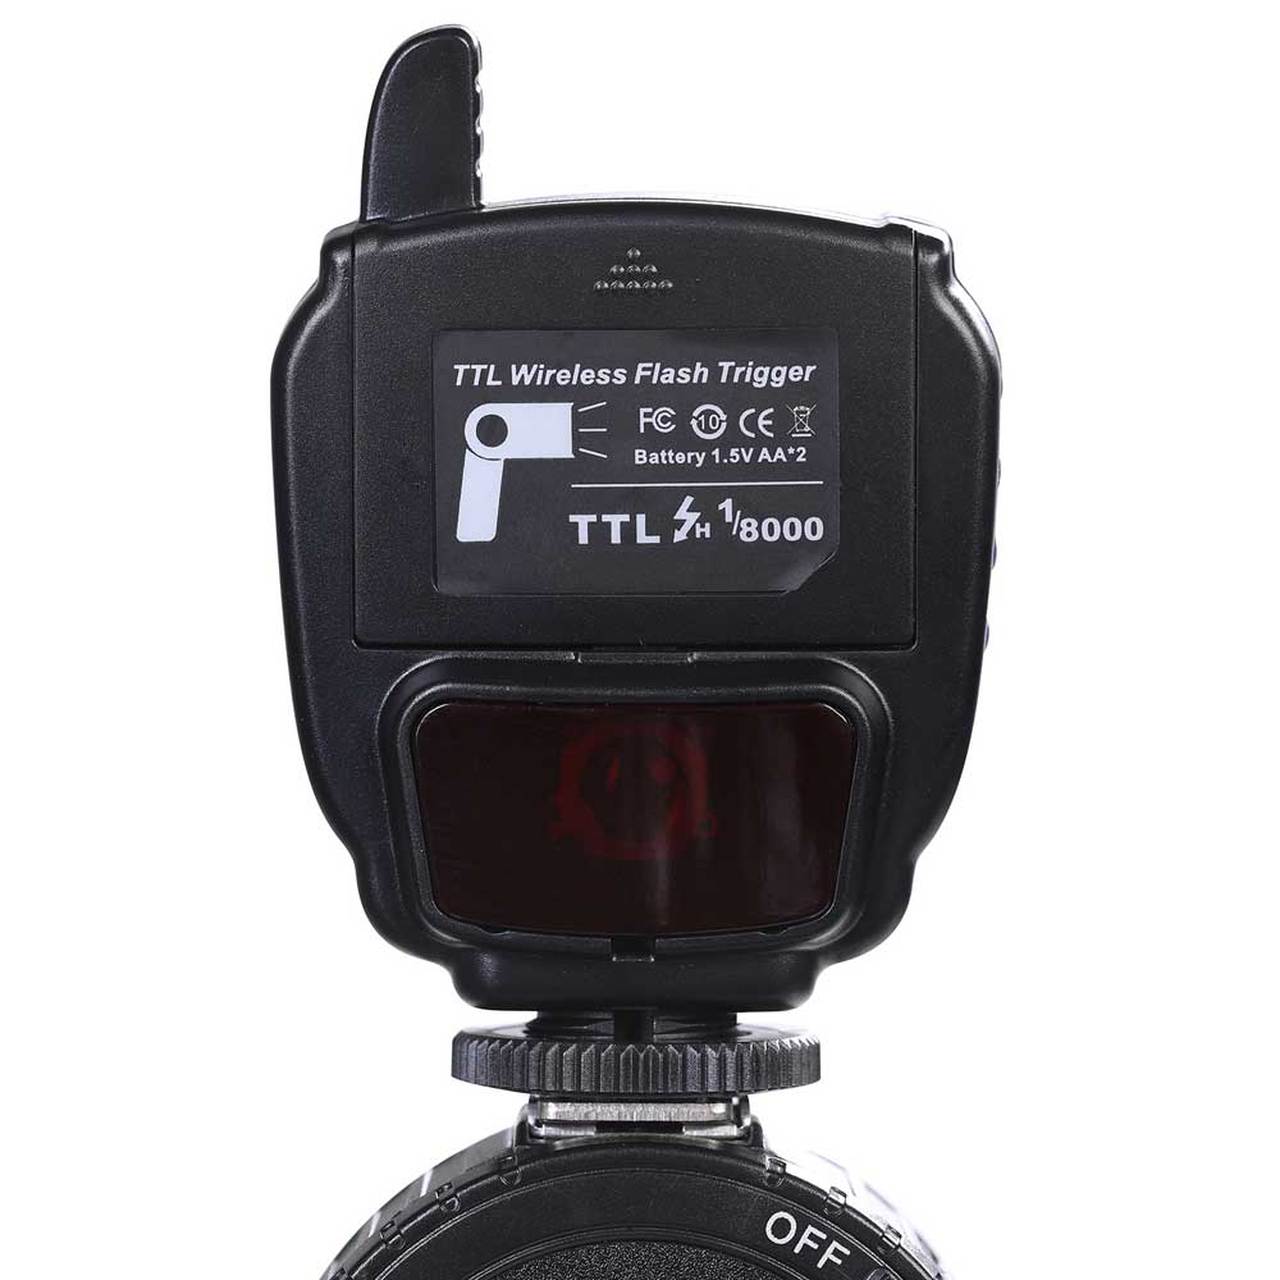 6866 ProMaster Unplugged TTL Transmitter Canon 2.4 GHz